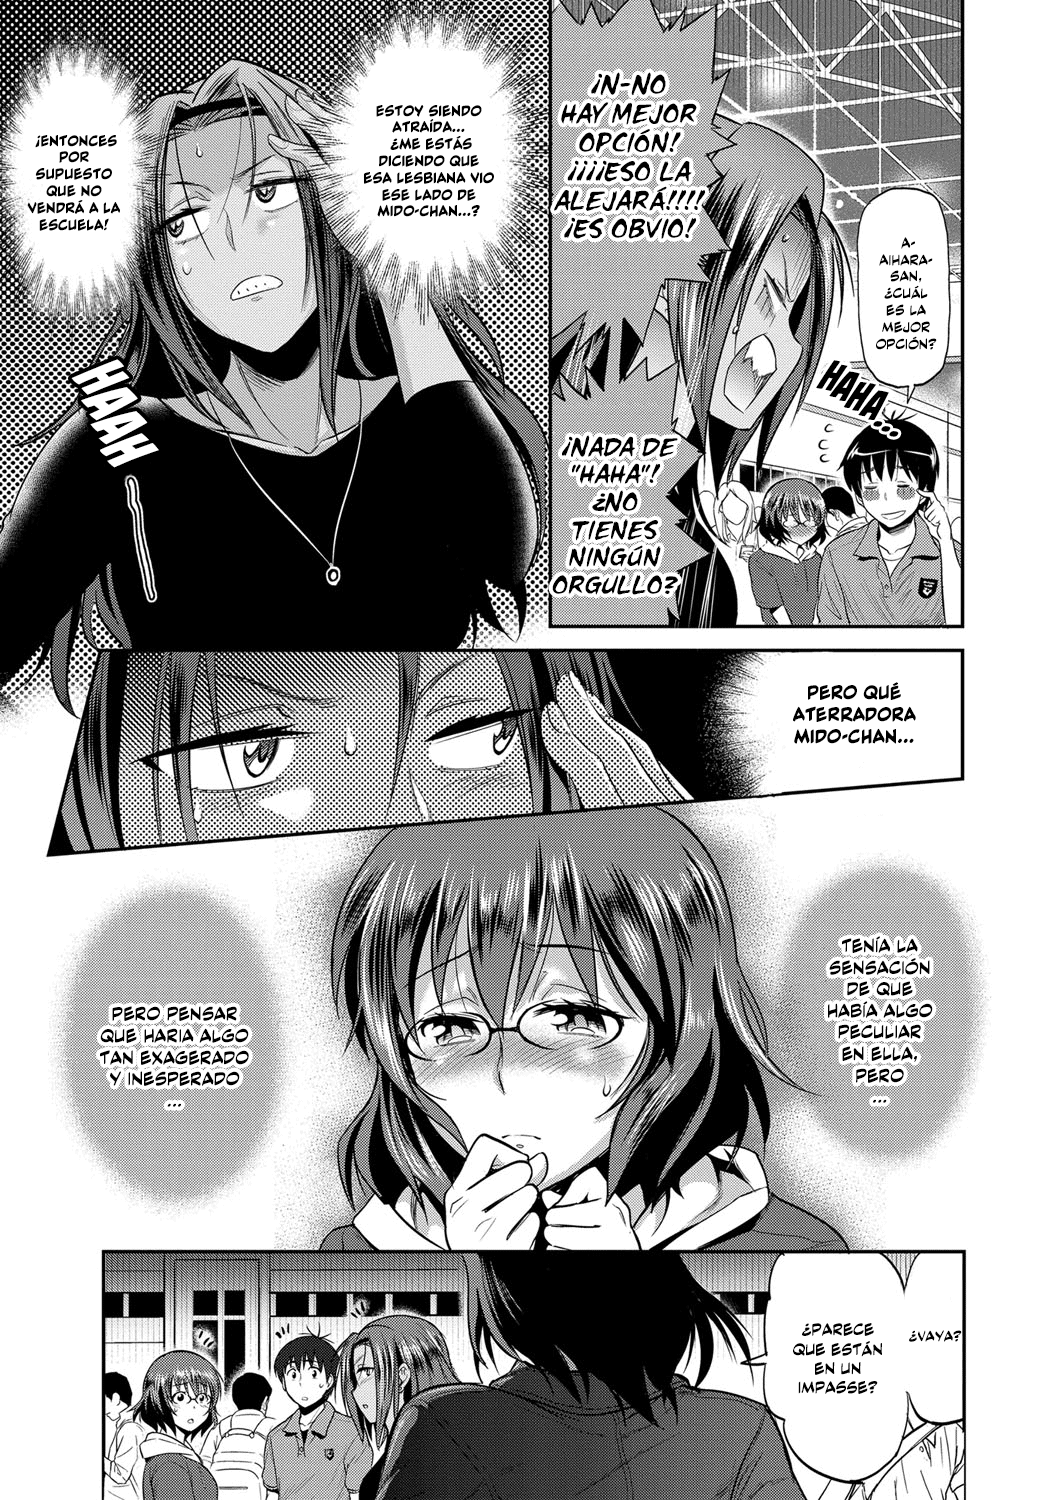 [DISTANCE] Joshi Lacu! - Girls Lacrosse Club ~2 Years Later~ Ch.07 (COMIC ExE 11) [Español] [NicoNiiScans] [Digital] [DISTANCE] じょしラク! ～2 Years Later～ 第7話 (コミック エグゼ 11) [スペイン翻訳] [DL版]